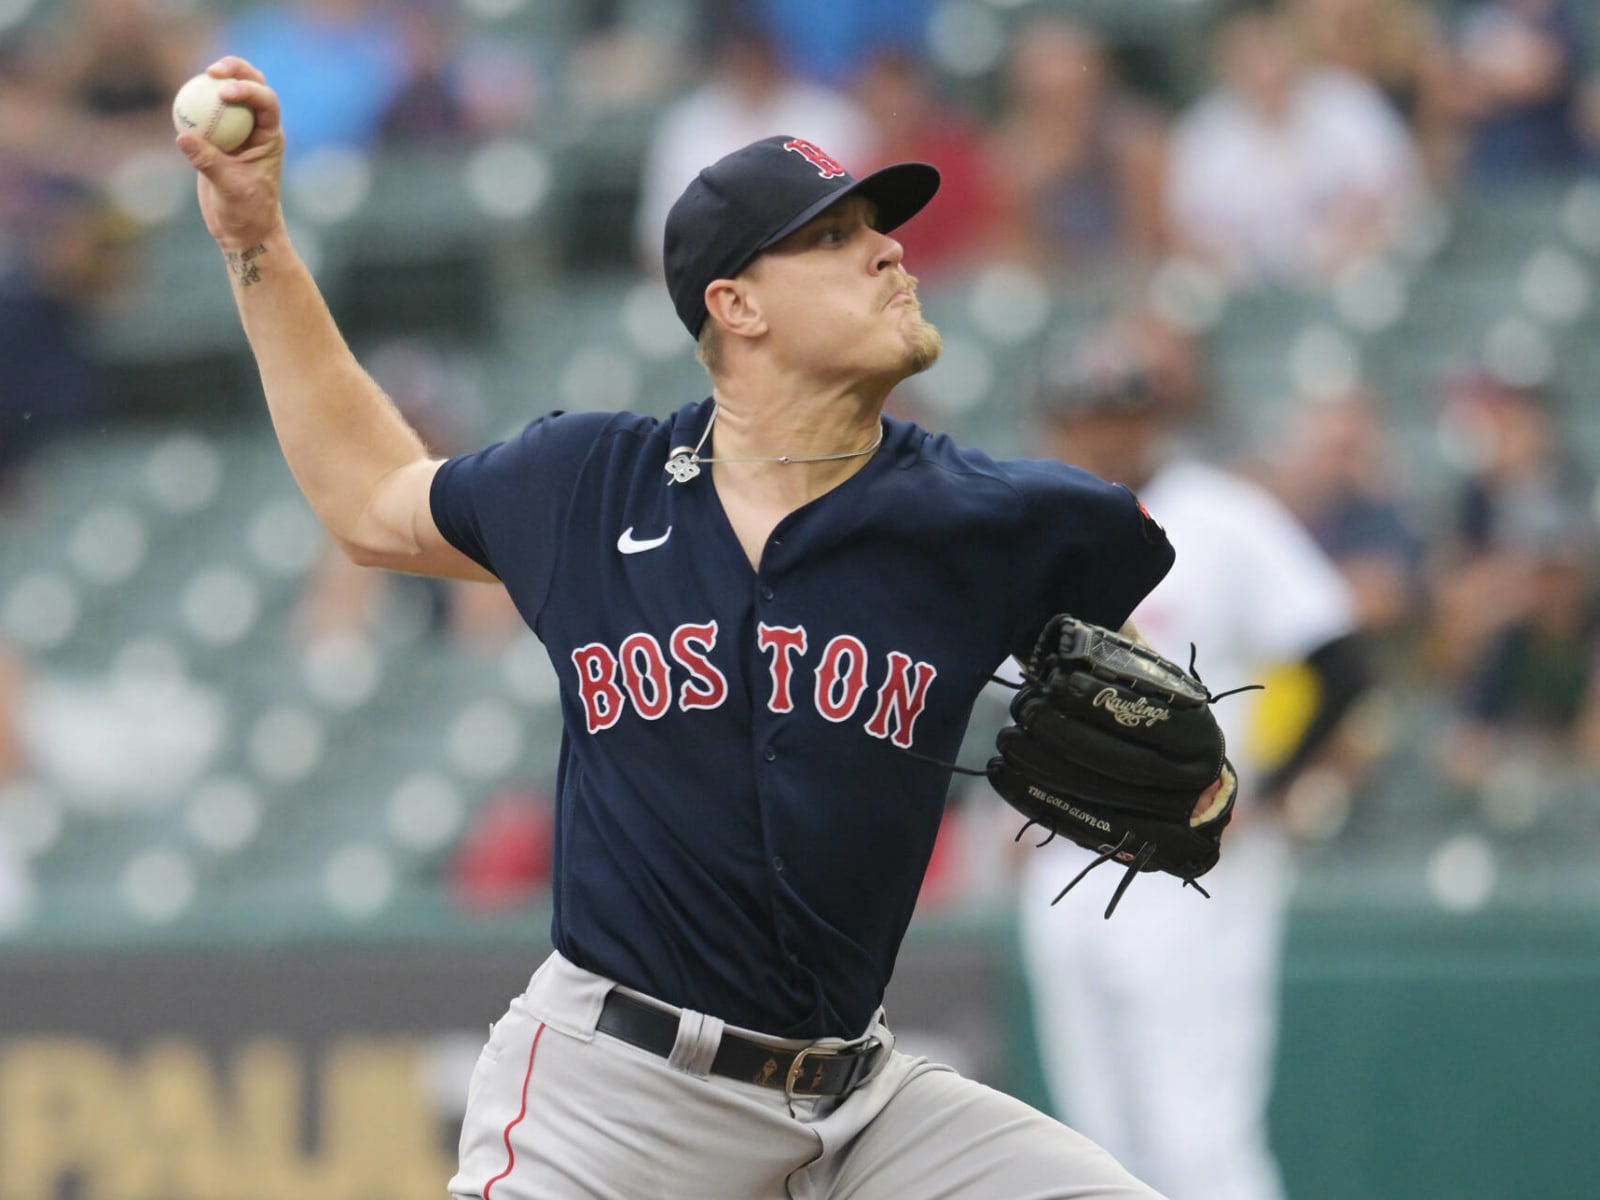 Tanner Houck supplies the real power in Red Sox's win